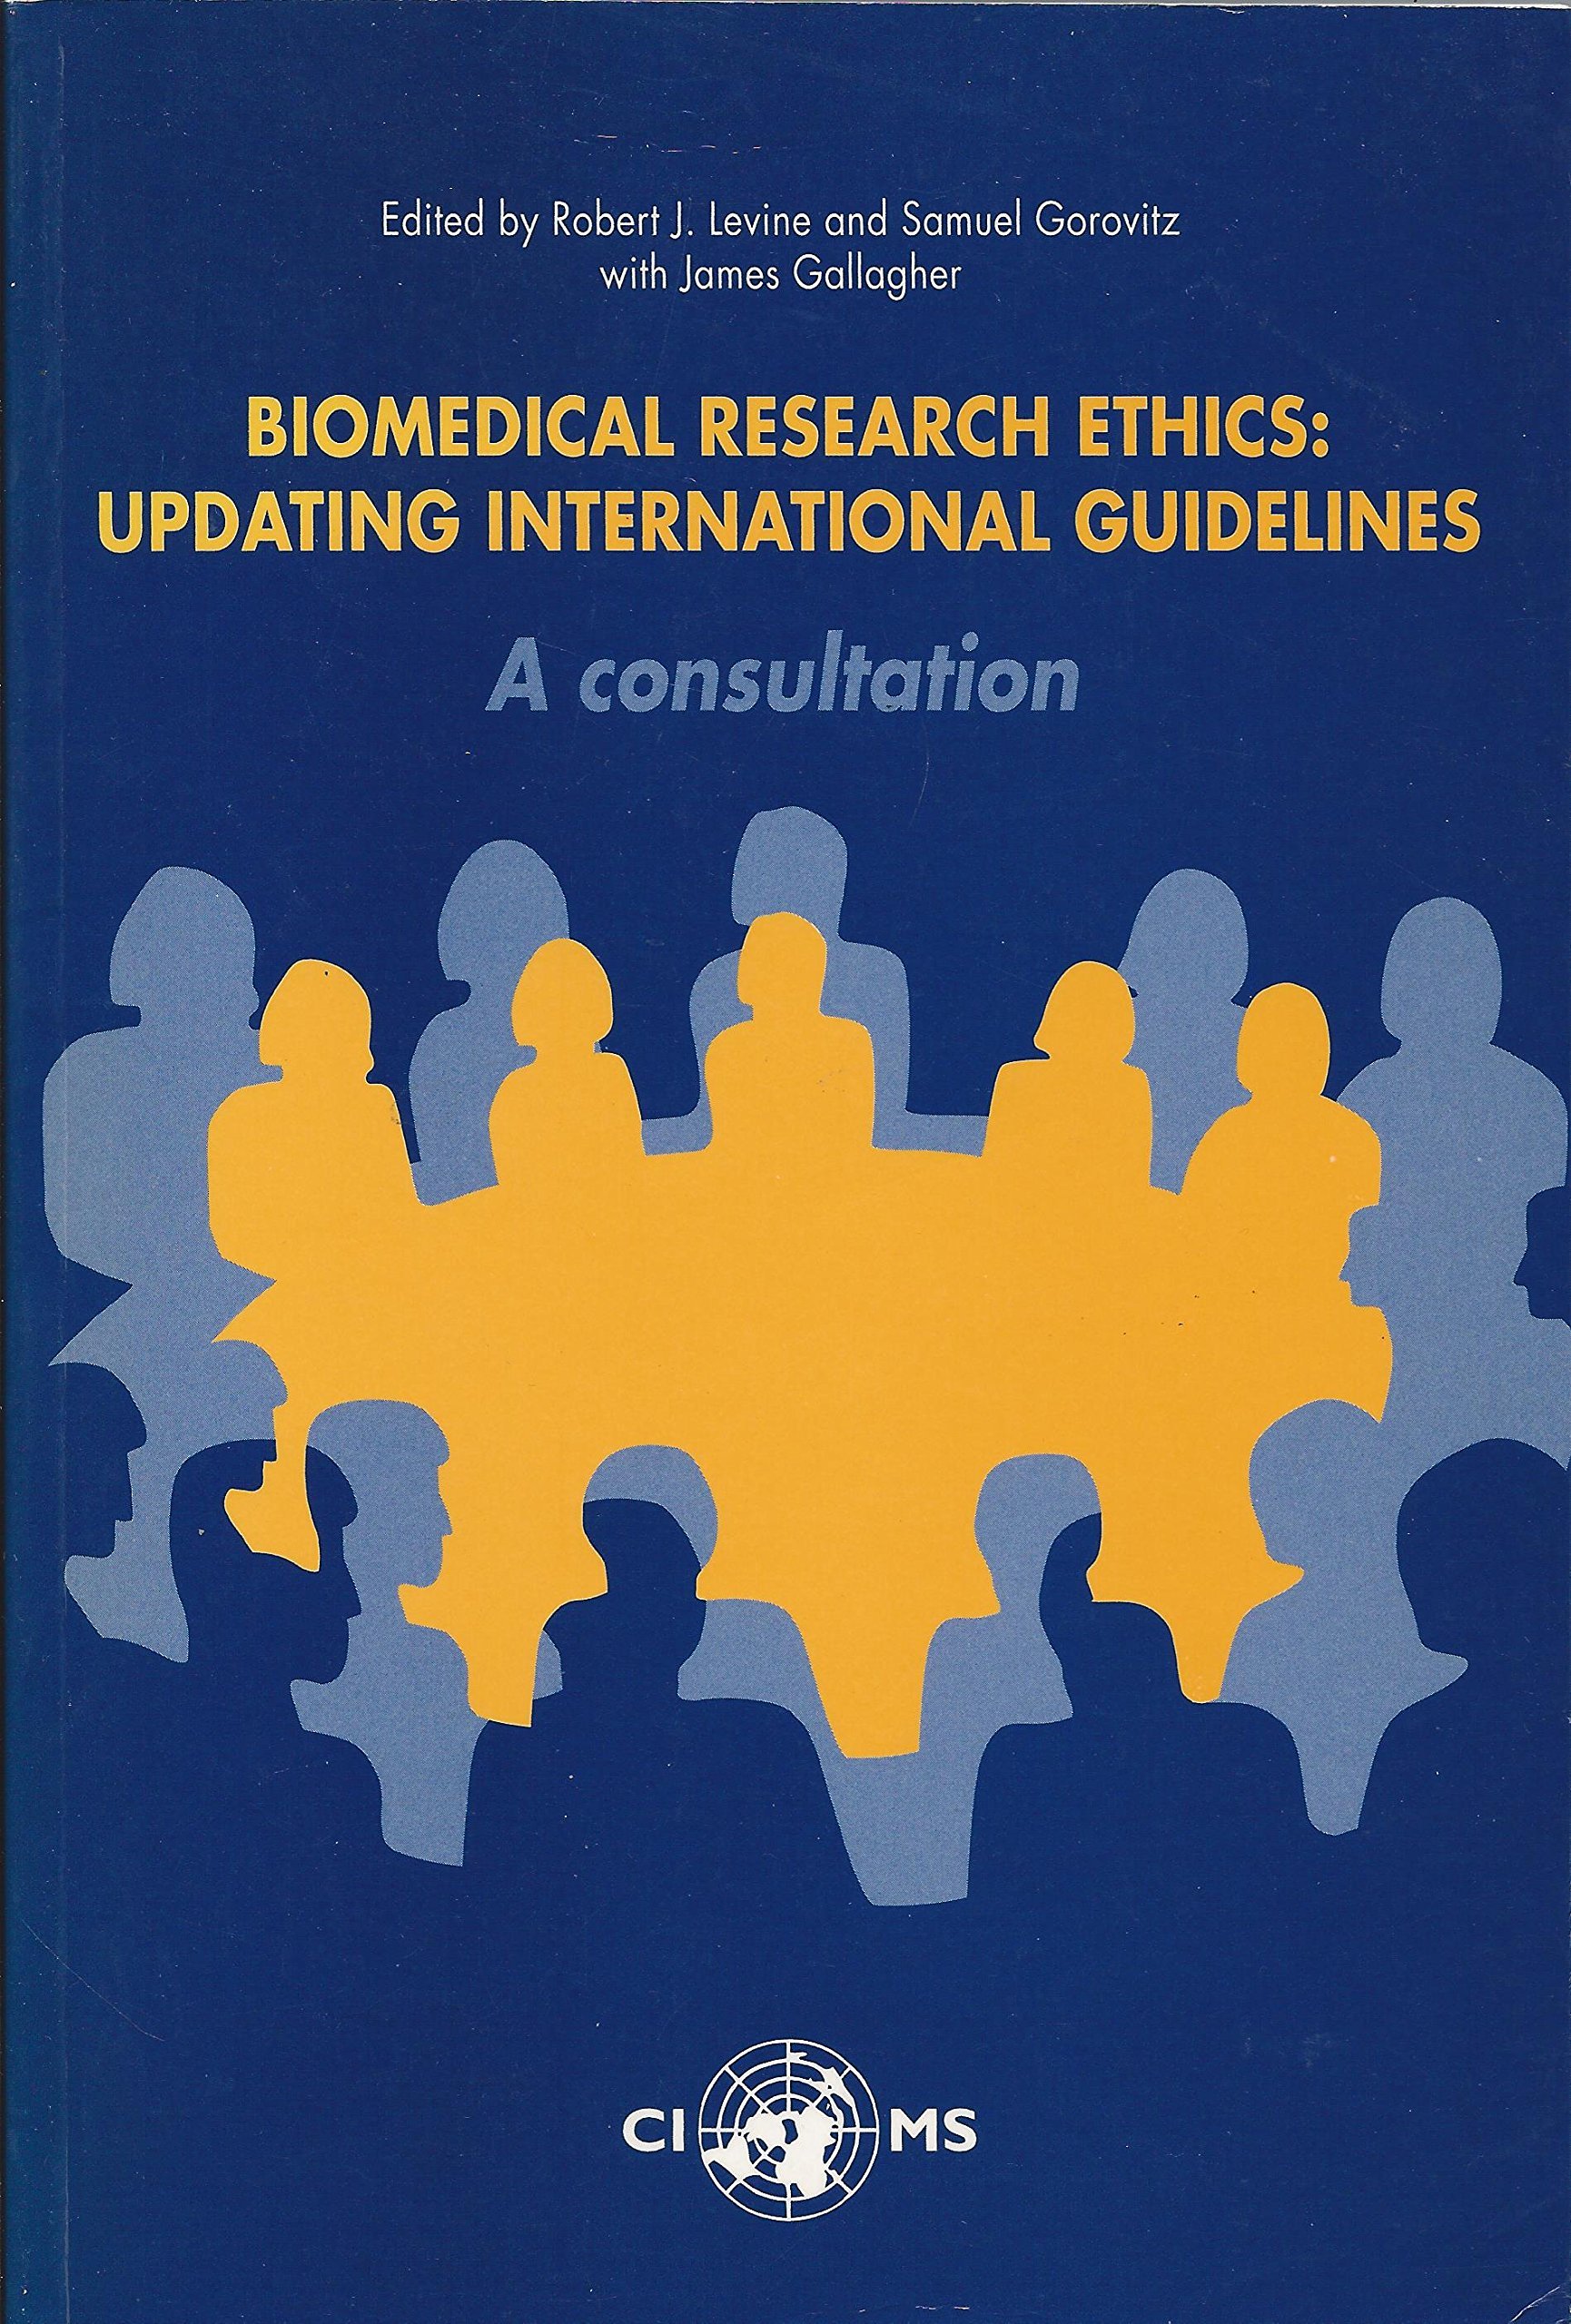 Biomedical Research Ethics: Updating International Guidelines